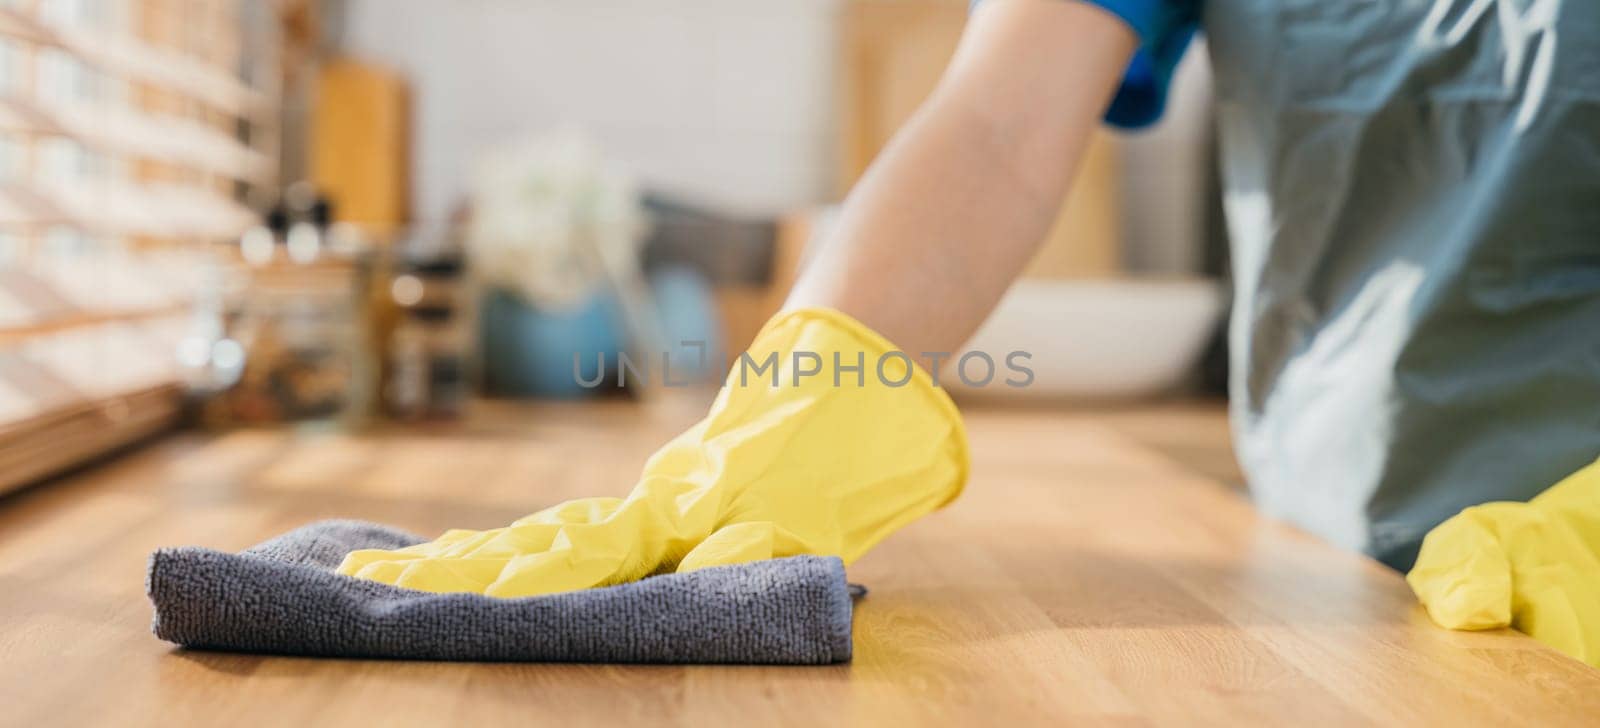 Housewife or maid in modern kitchen wipes dining table surface. Using professional cleaning products for home tidiness. Cleaner at work safety glove hygiene routine. Maid housekeeping concept. by Sorapop